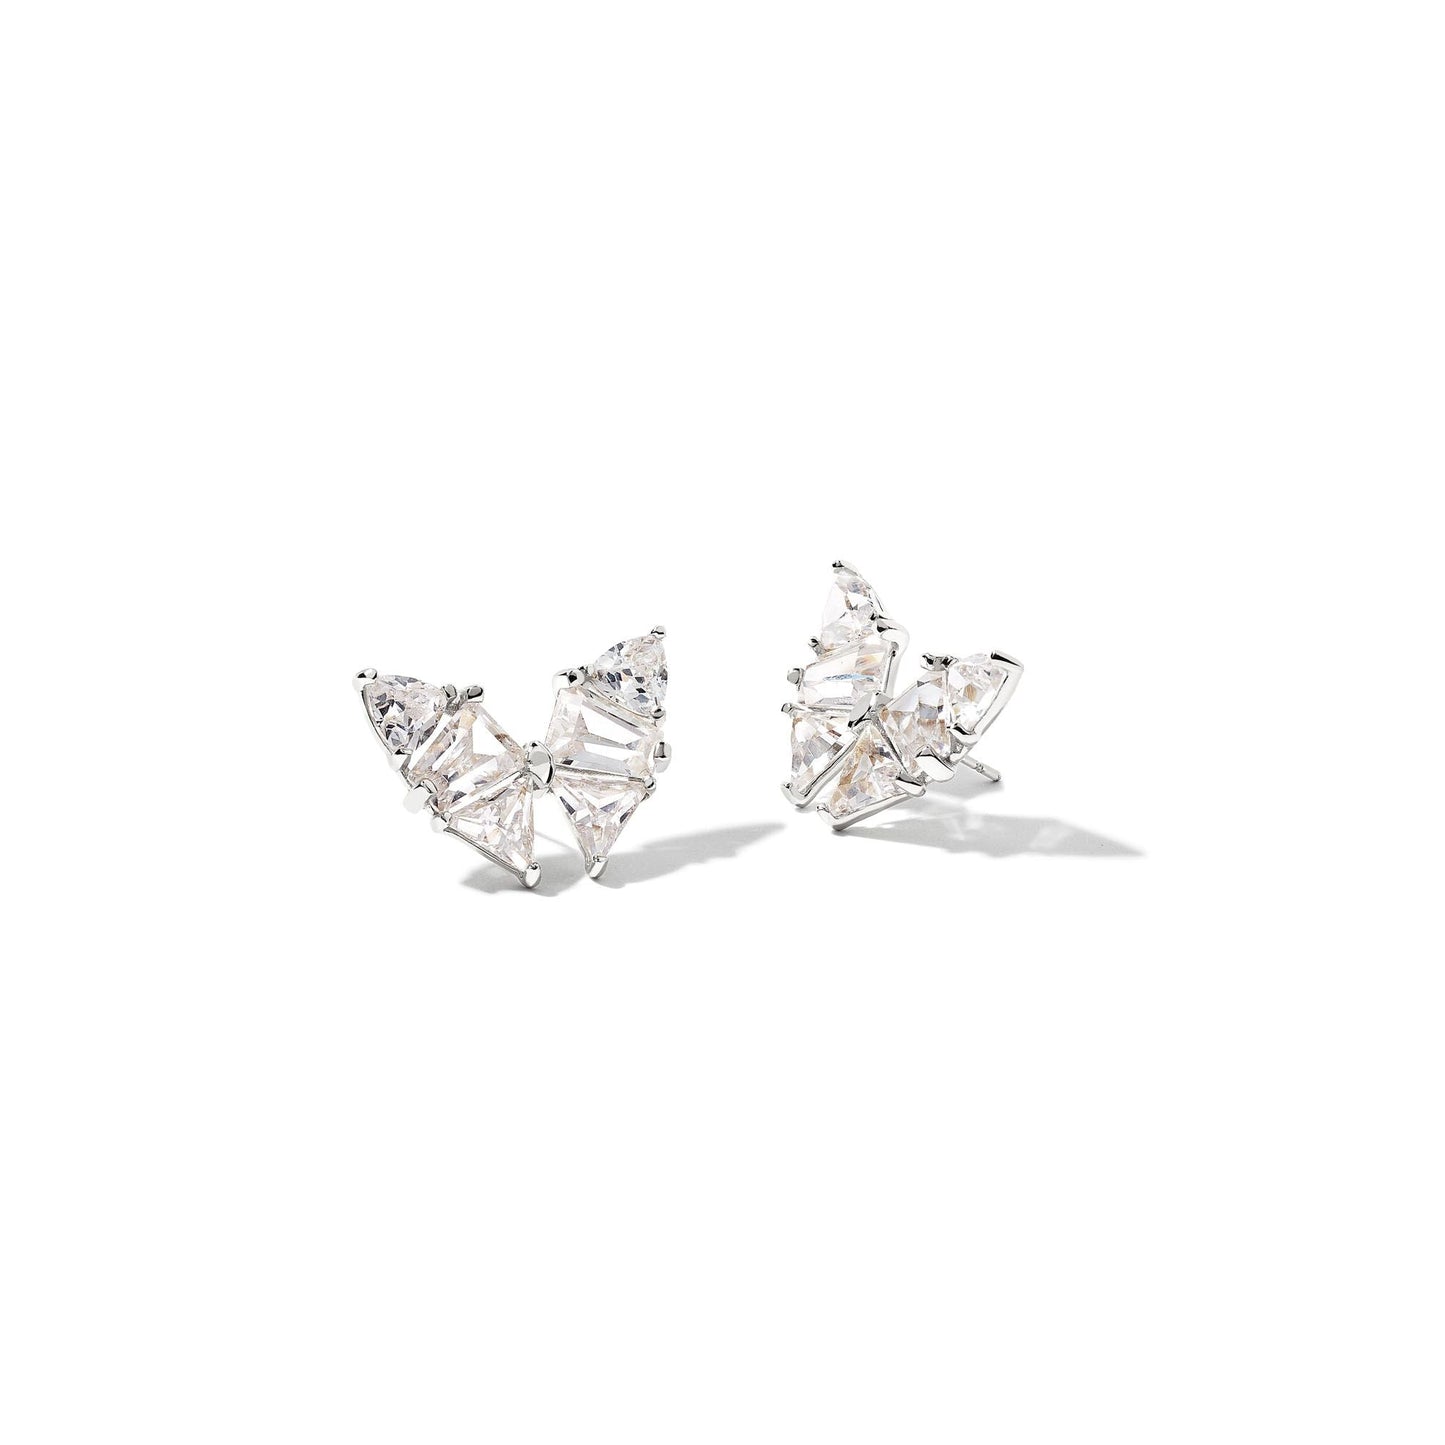 Blair Butterfly Studs in Rhodium and White Crystal